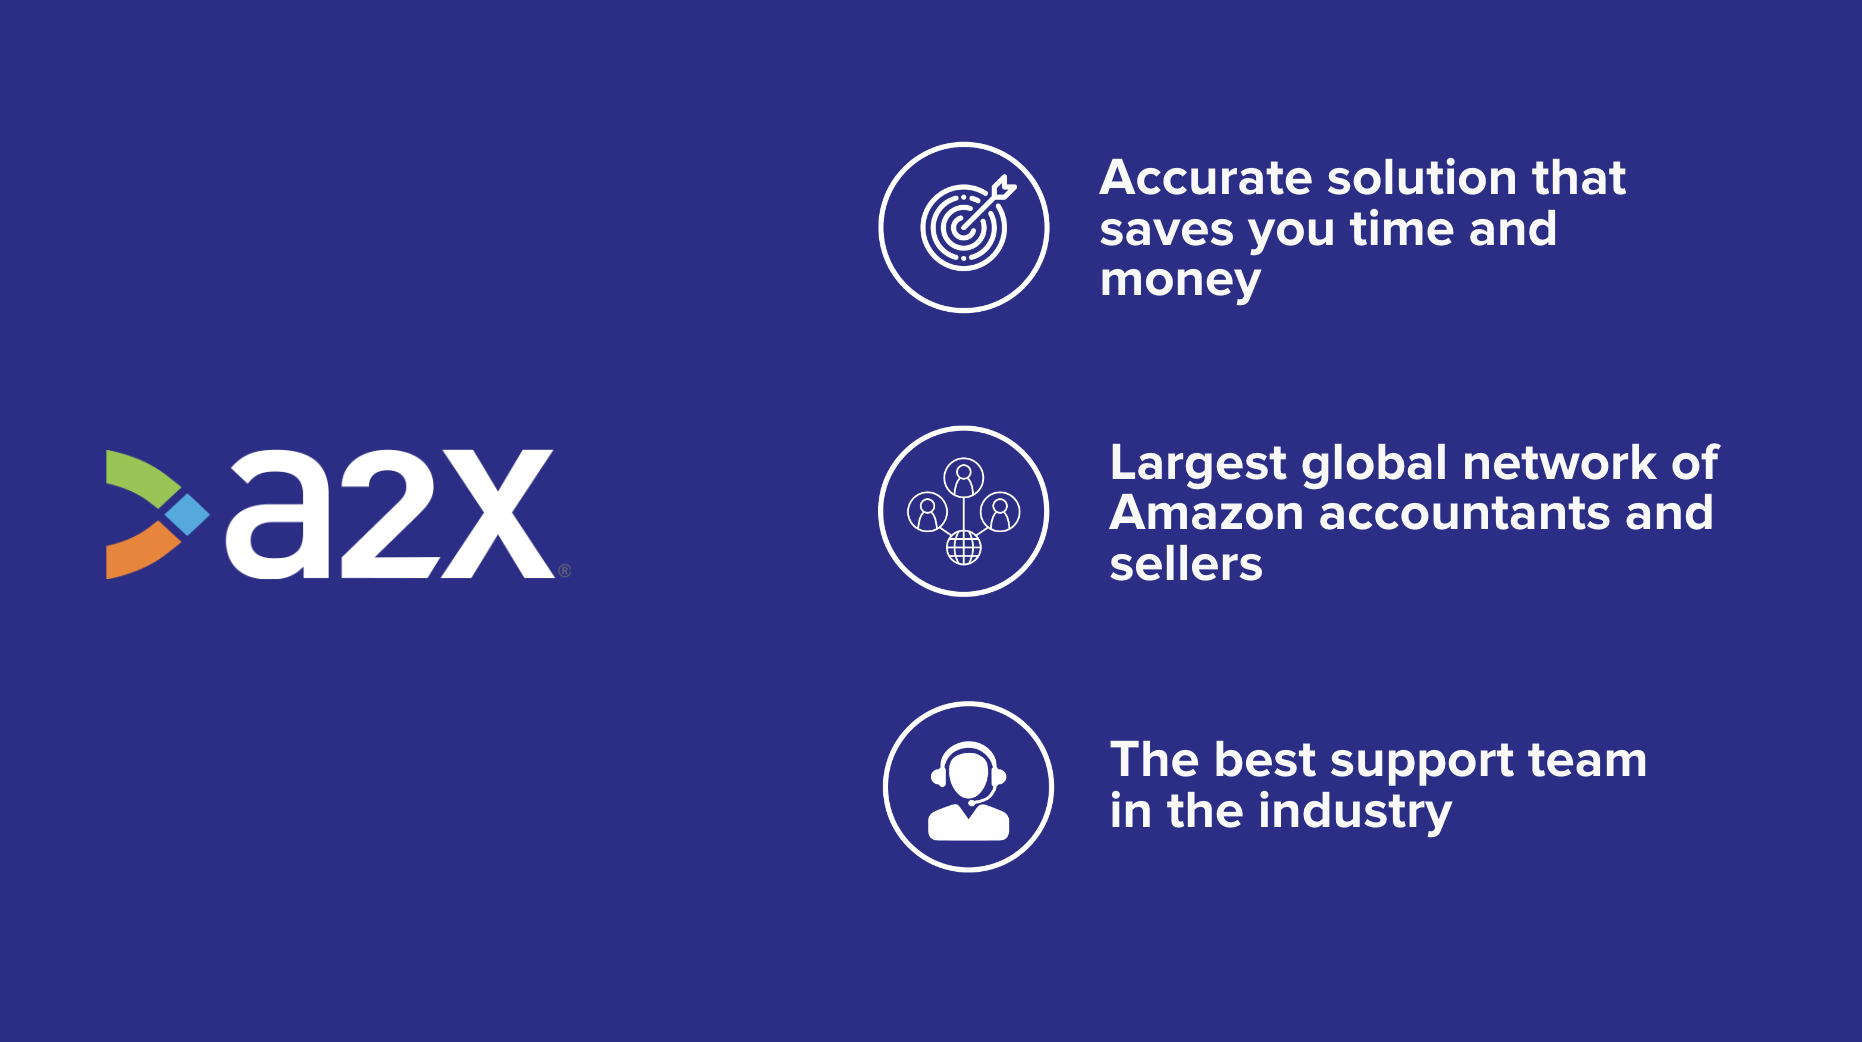 A2X helps users with its accuracy that saves time and money, it has the largest network of Amazon accountants, and the best support team in the industry